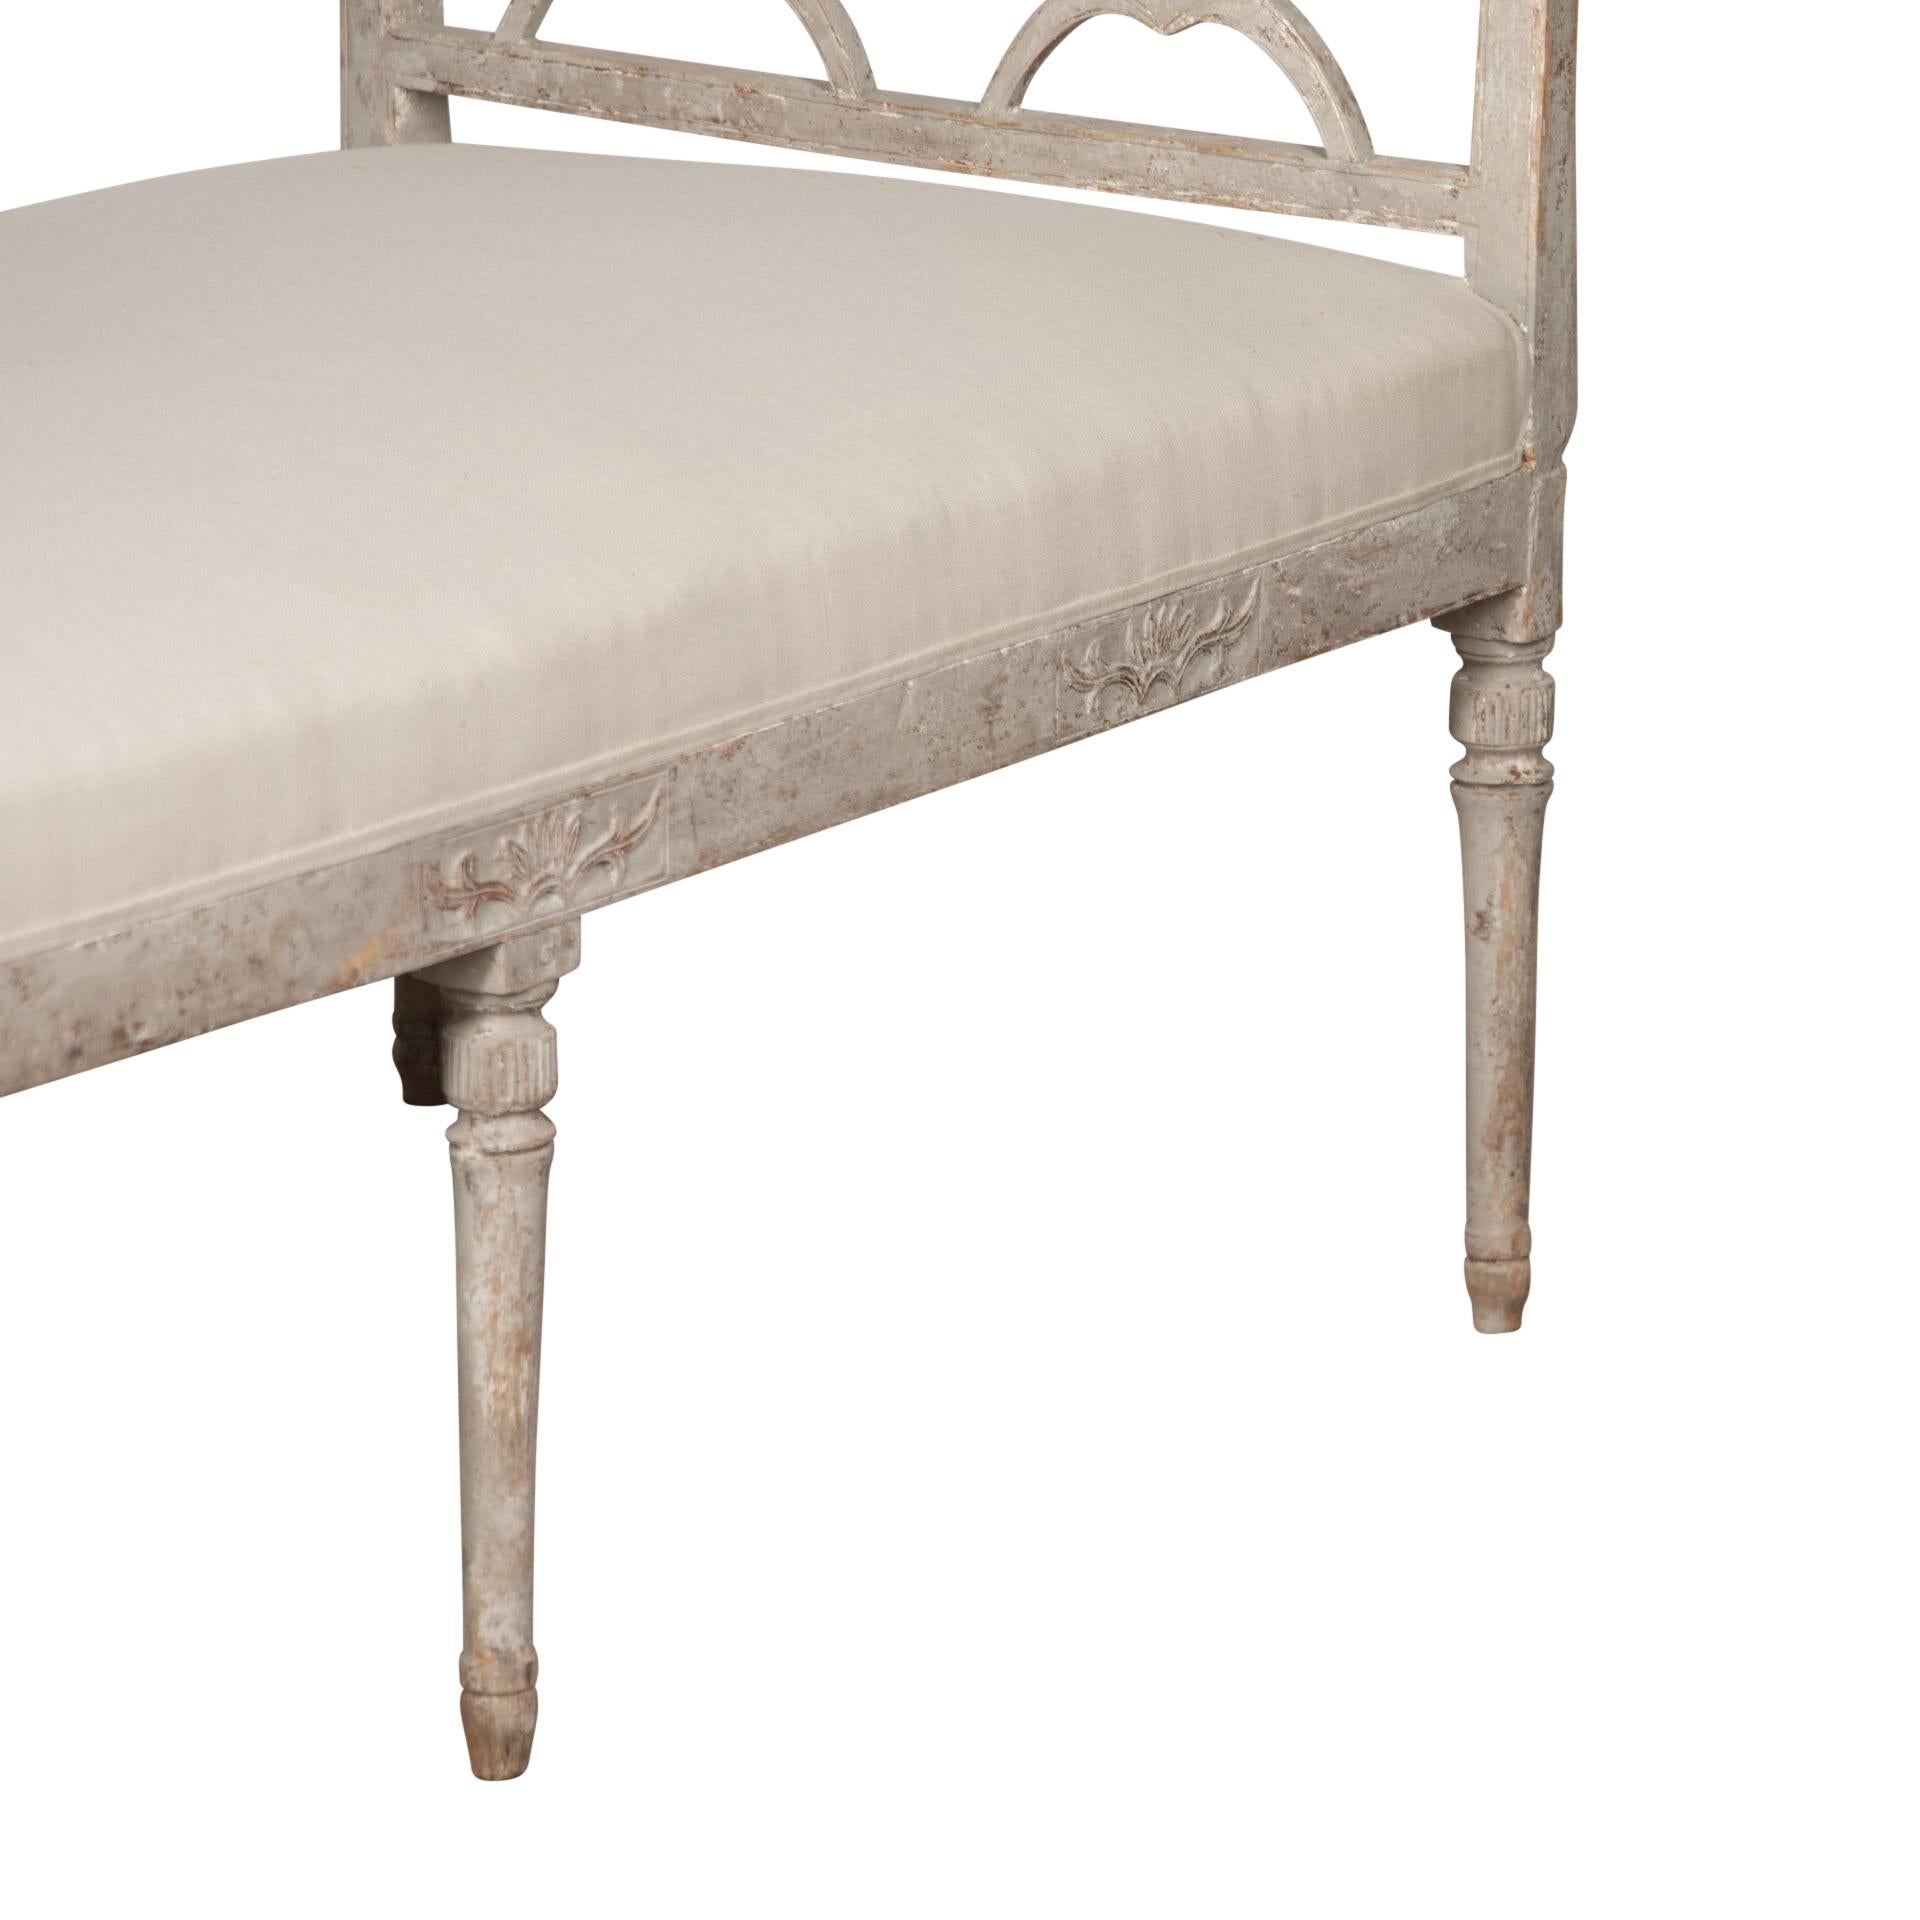 19th Century Gustavian Period Bench In Good Condition For Sale In Tetbury, Gloucestershire